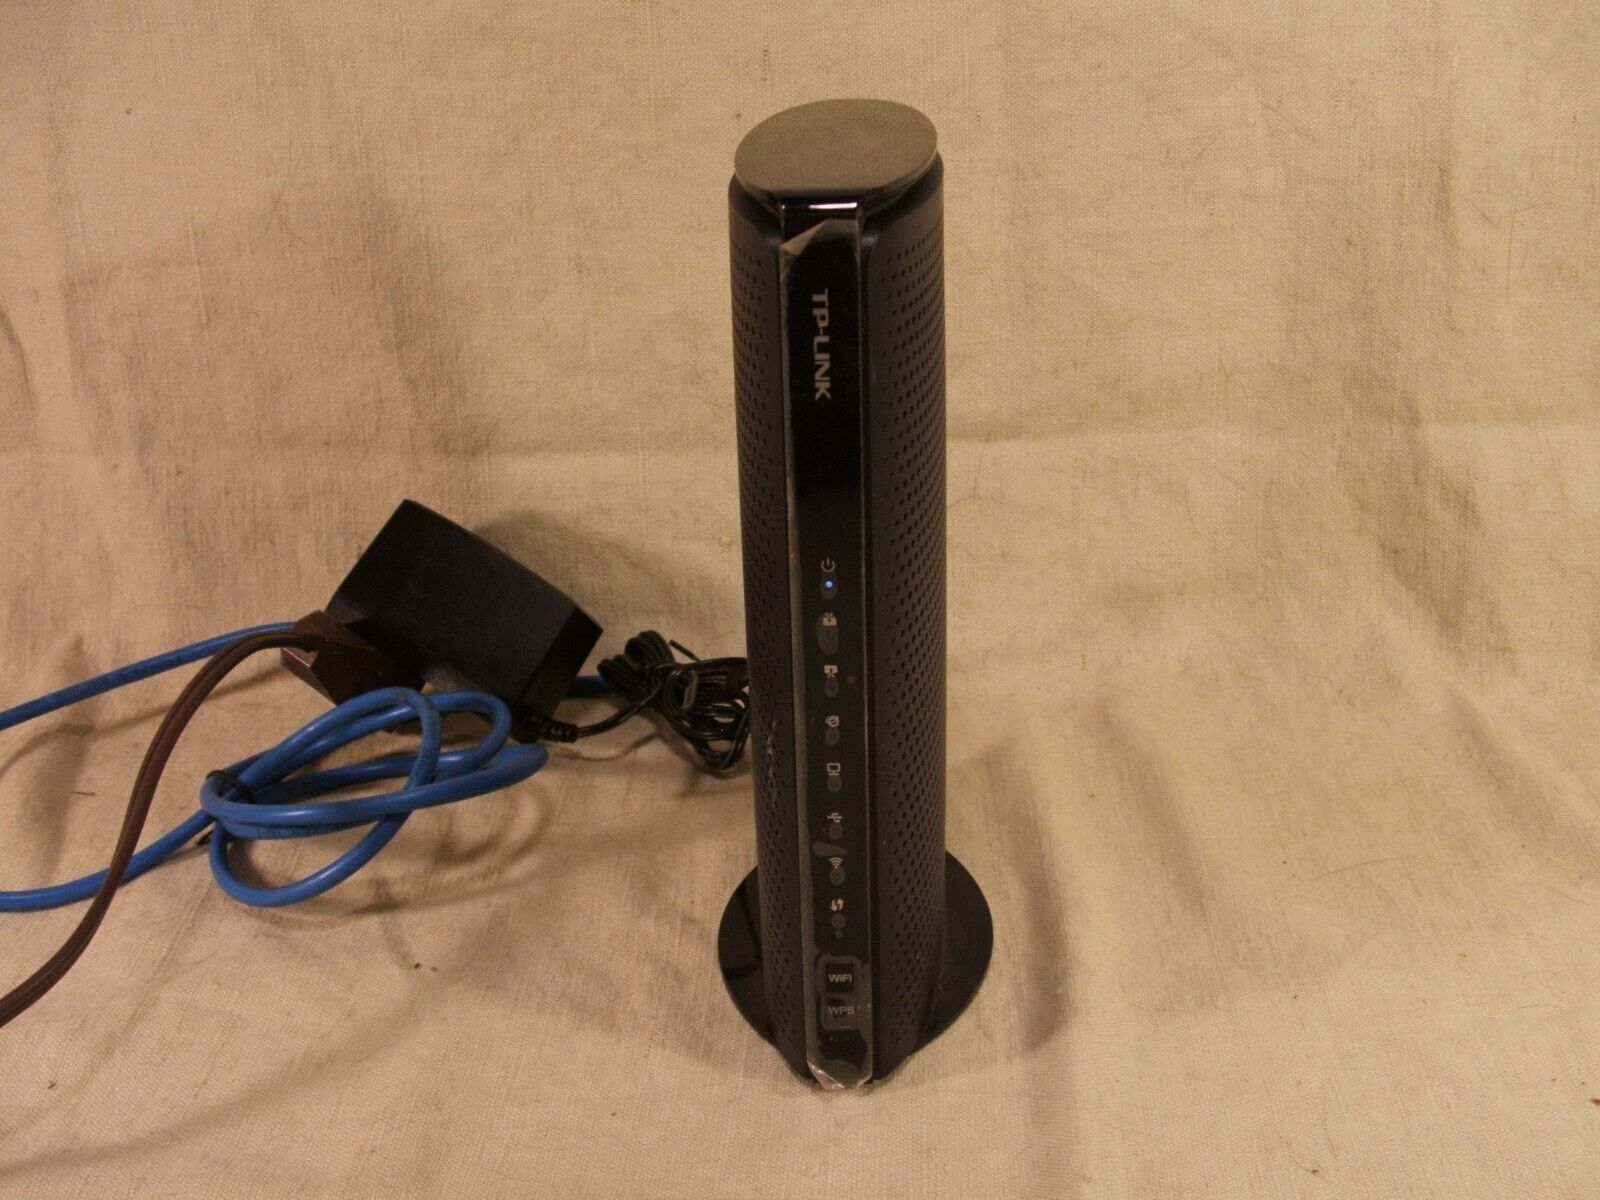 TP-Link TC-W7960 300Mbps Wireless N DOCSIS 3.0 Cable Modem Router UNTESTED